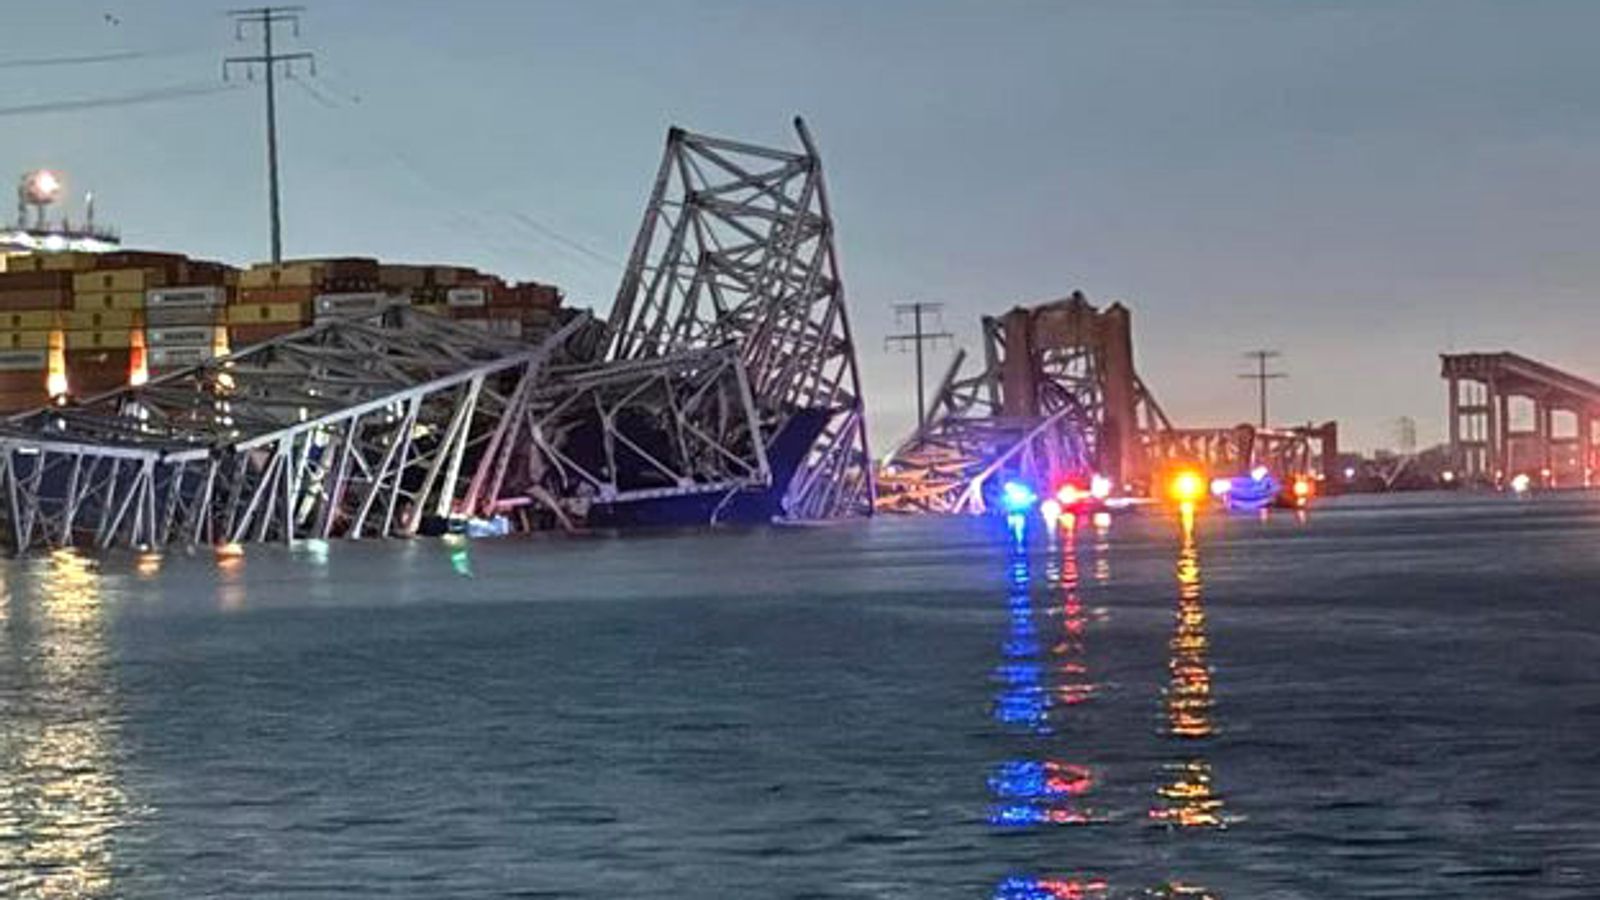 People and vehicles fall into water as Baltimore bridge collapses after being hit by ship